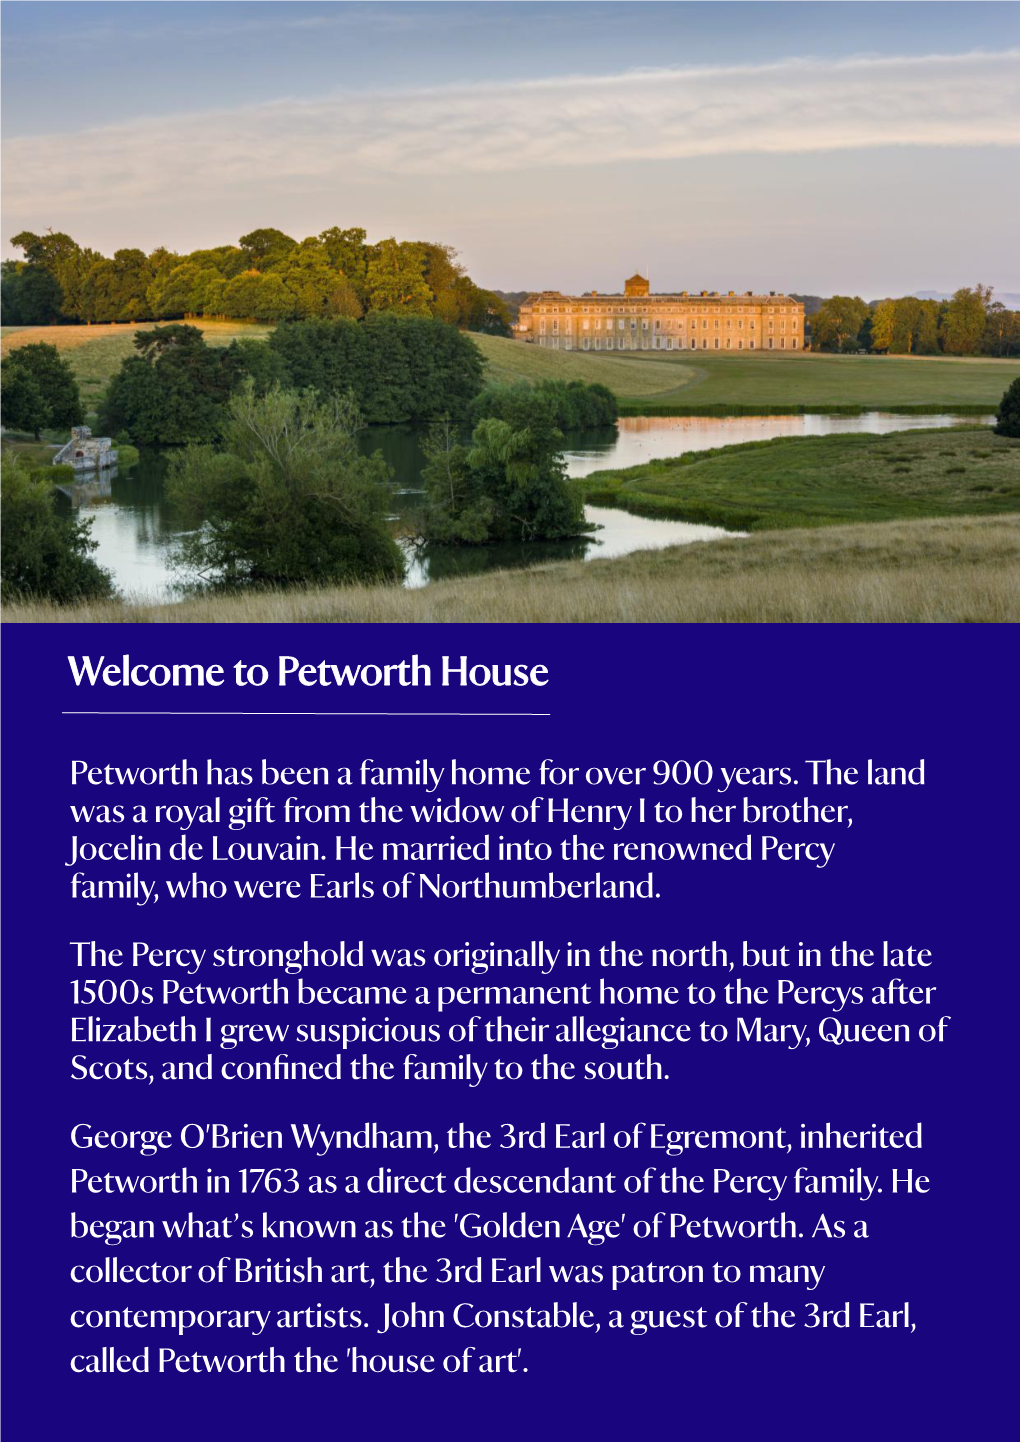 Welcome to Petworth House